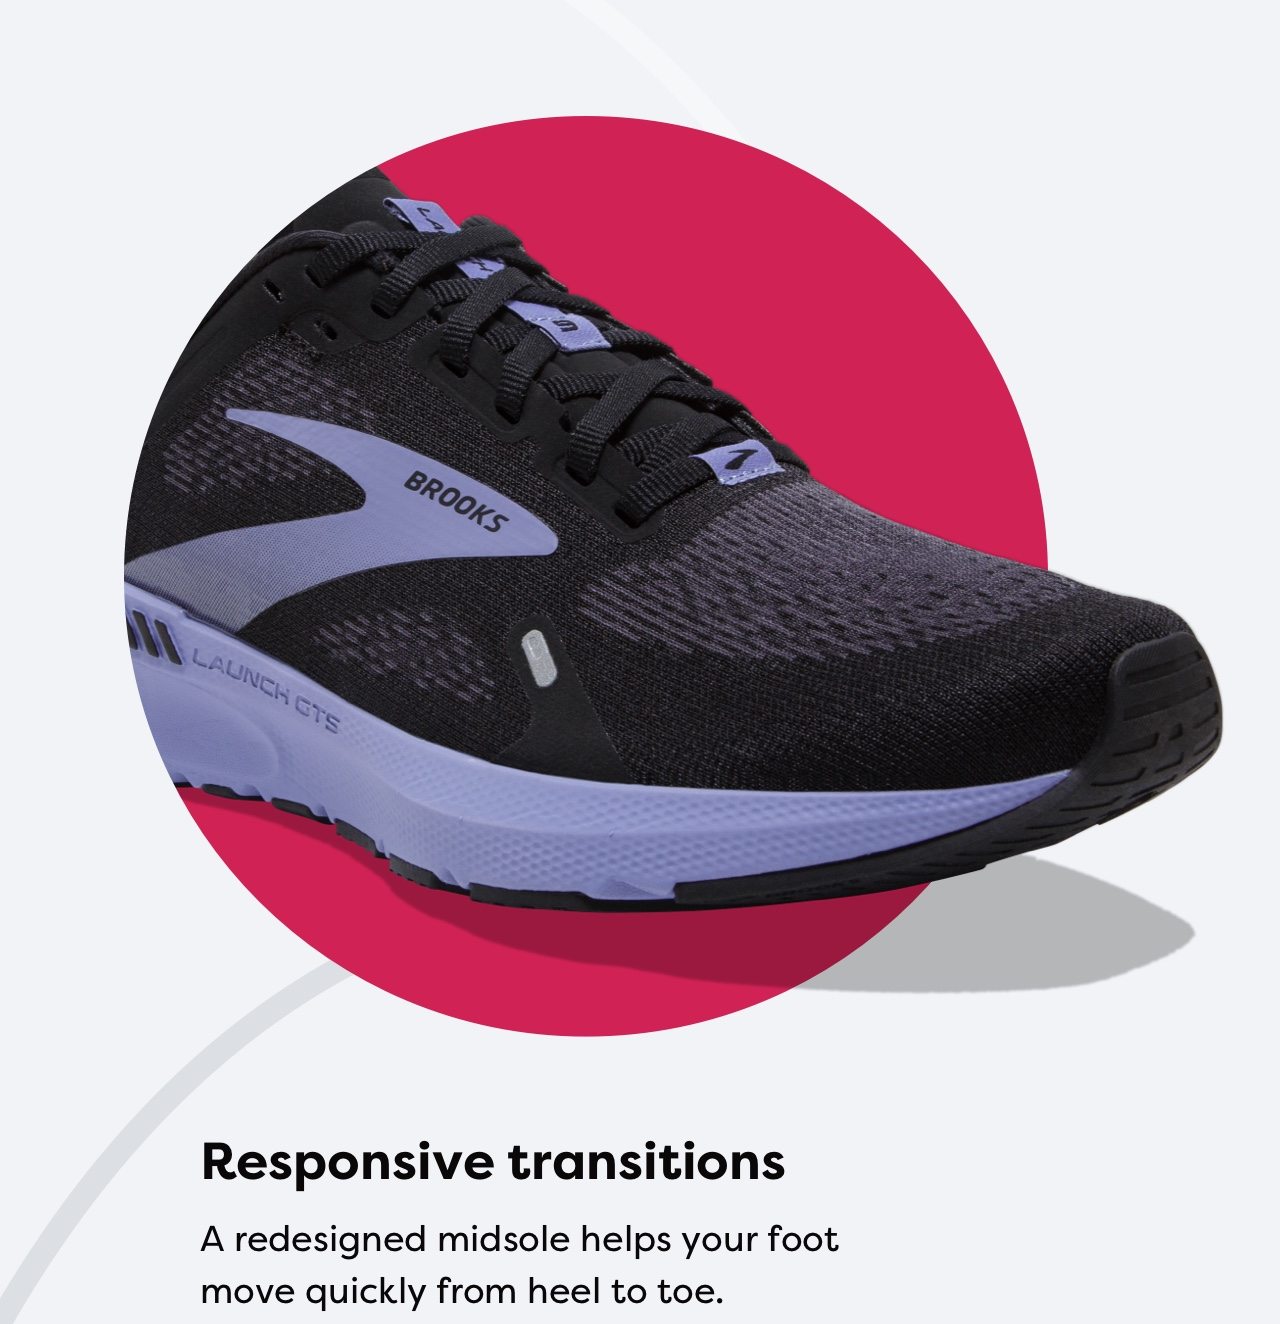 Responsive transitions | a redesigned midsole helps your foot move quickly from heel to toe.